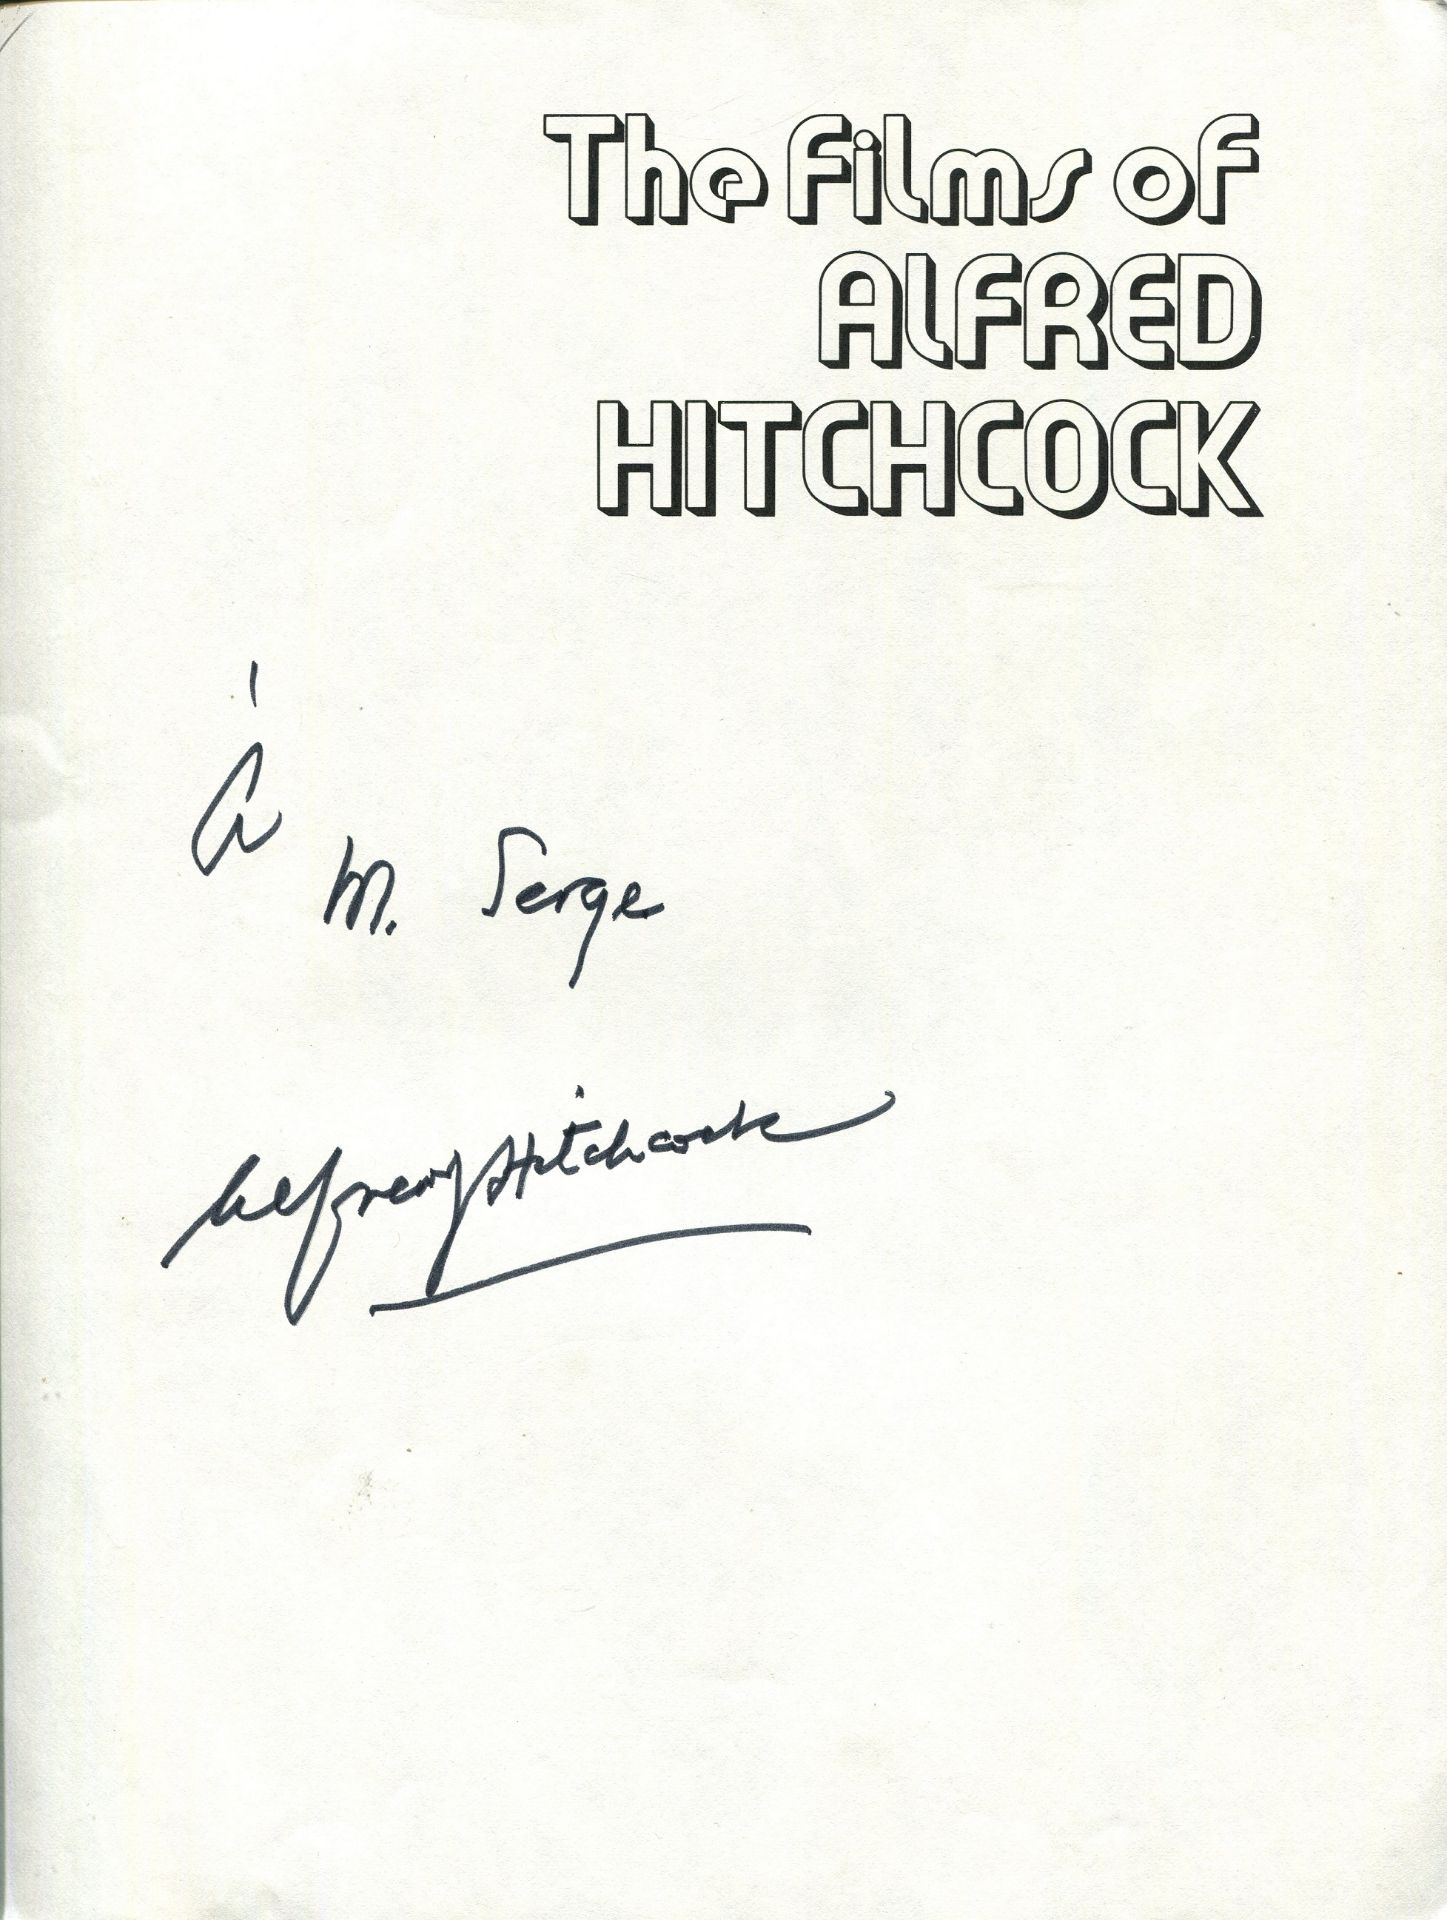 HITCHCOCK ALFRED: (1899-1980) British film director. Book signed and inscribed, being a softcover